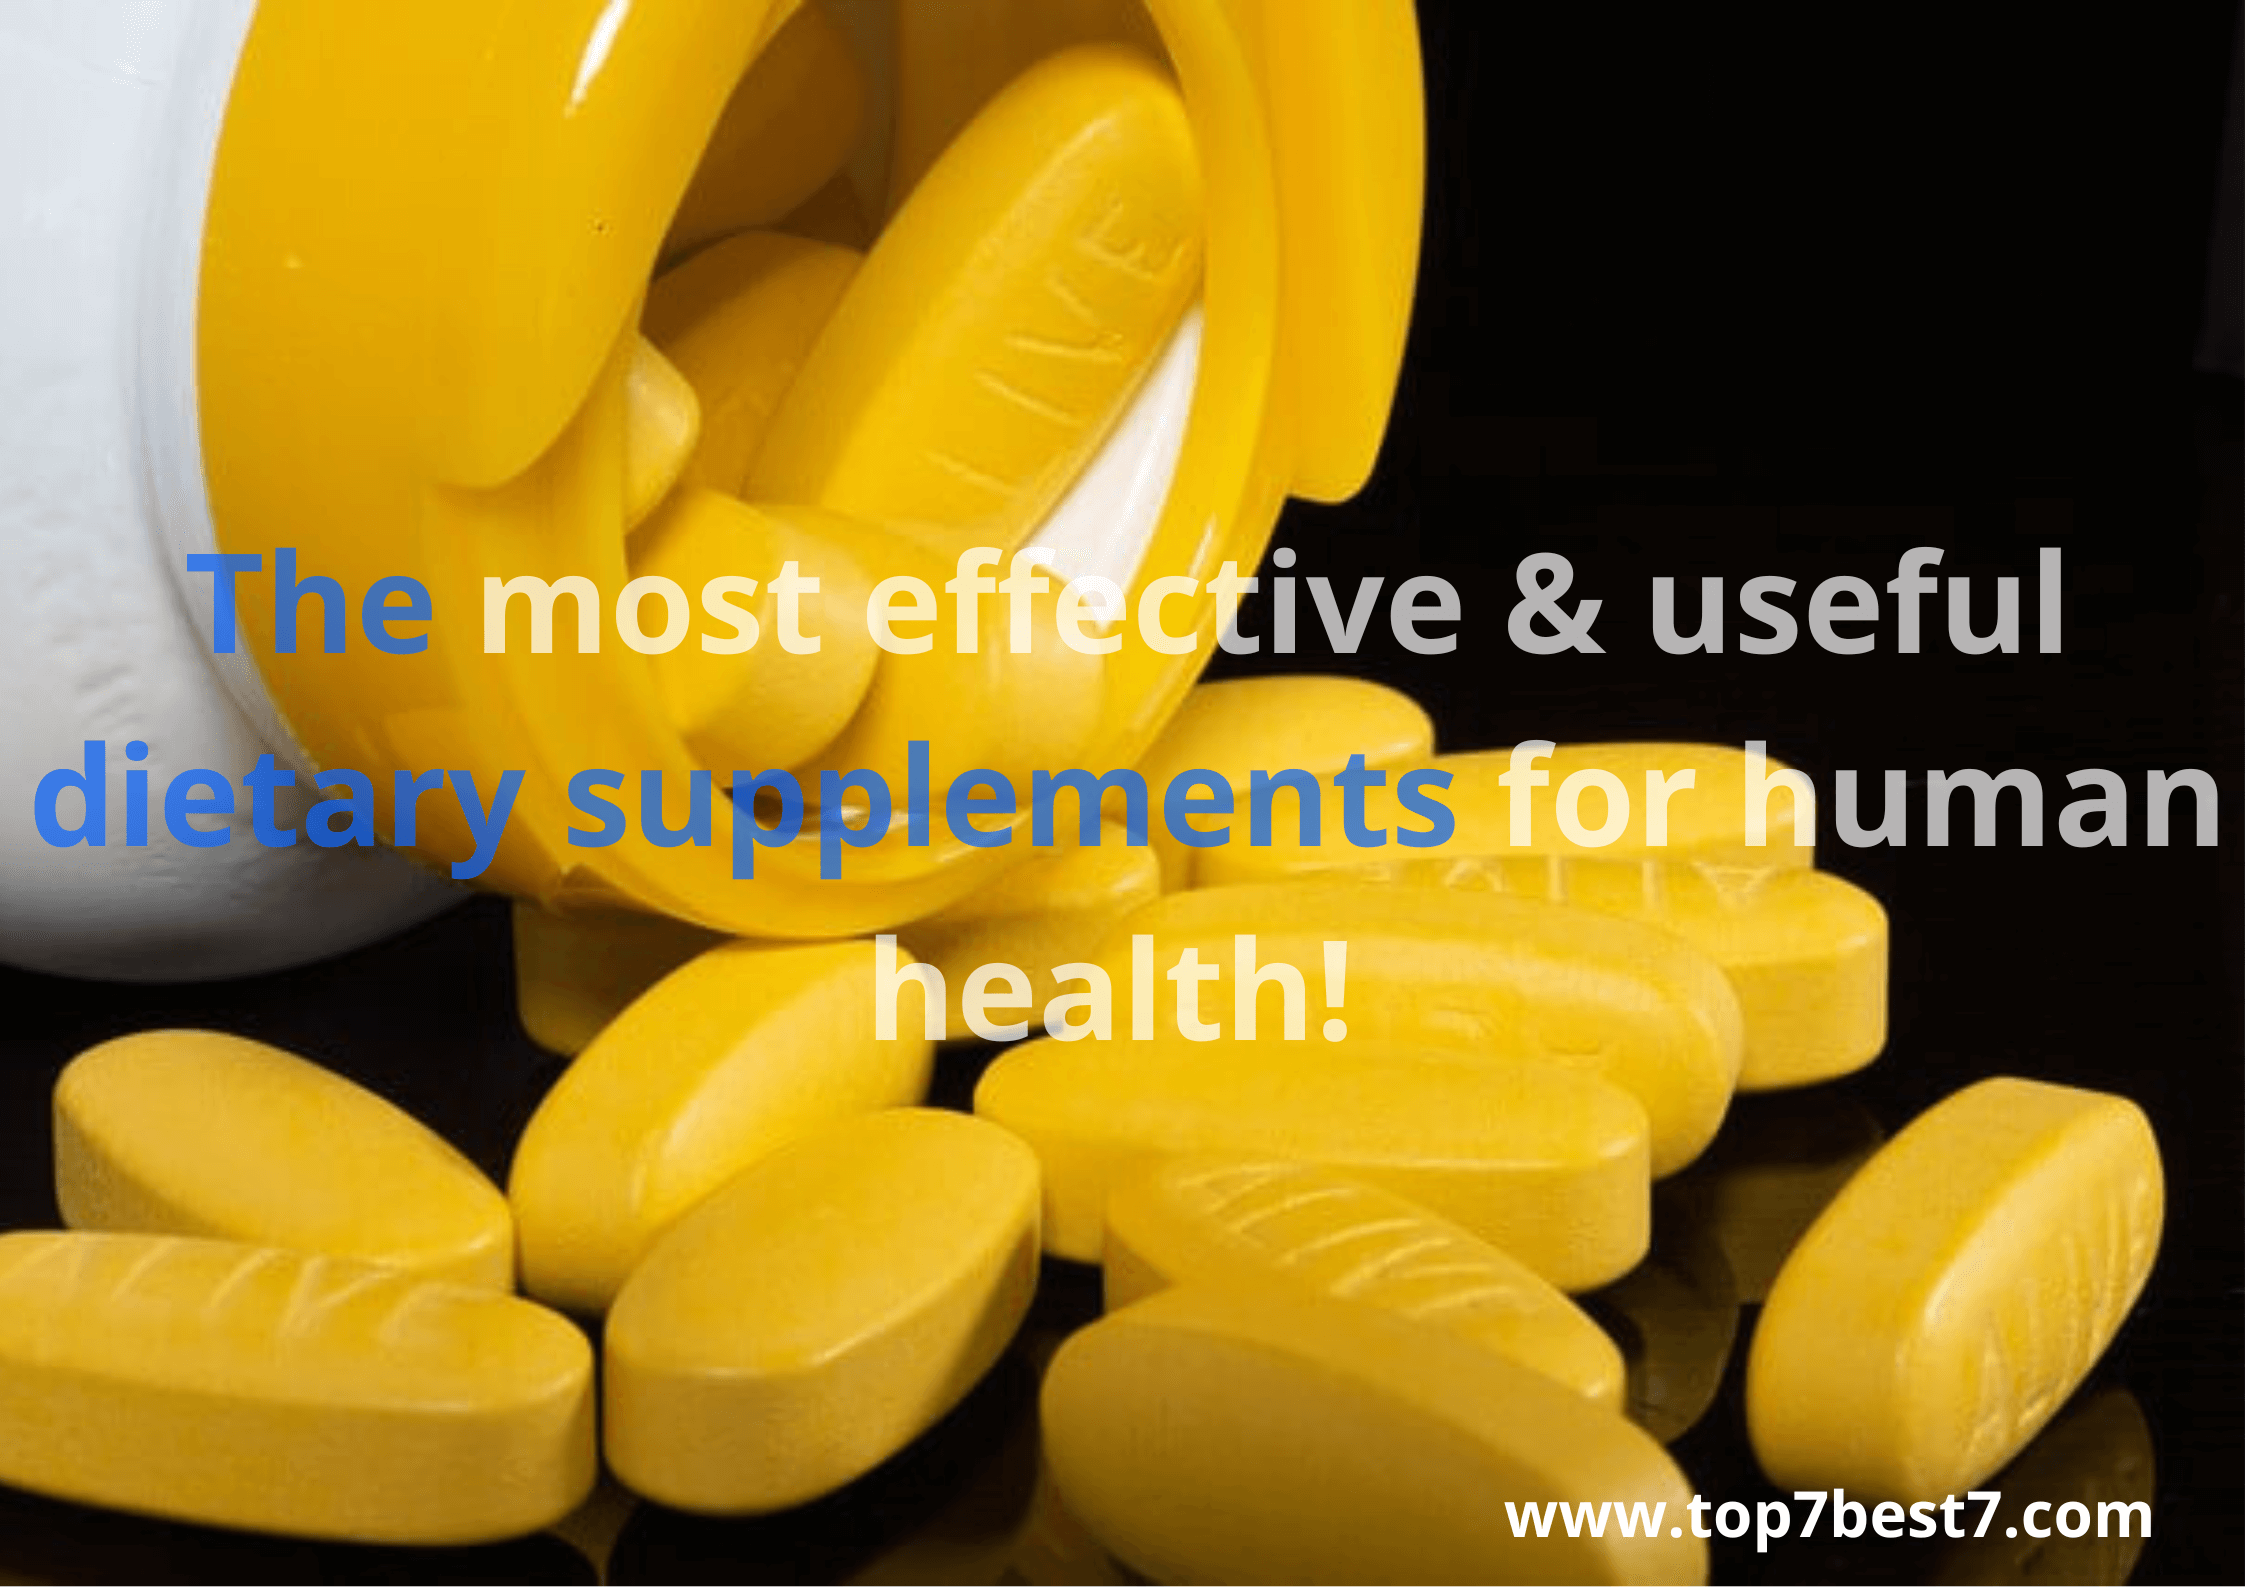 You are currently viewing The most effective and useful dietary supplements for human health!